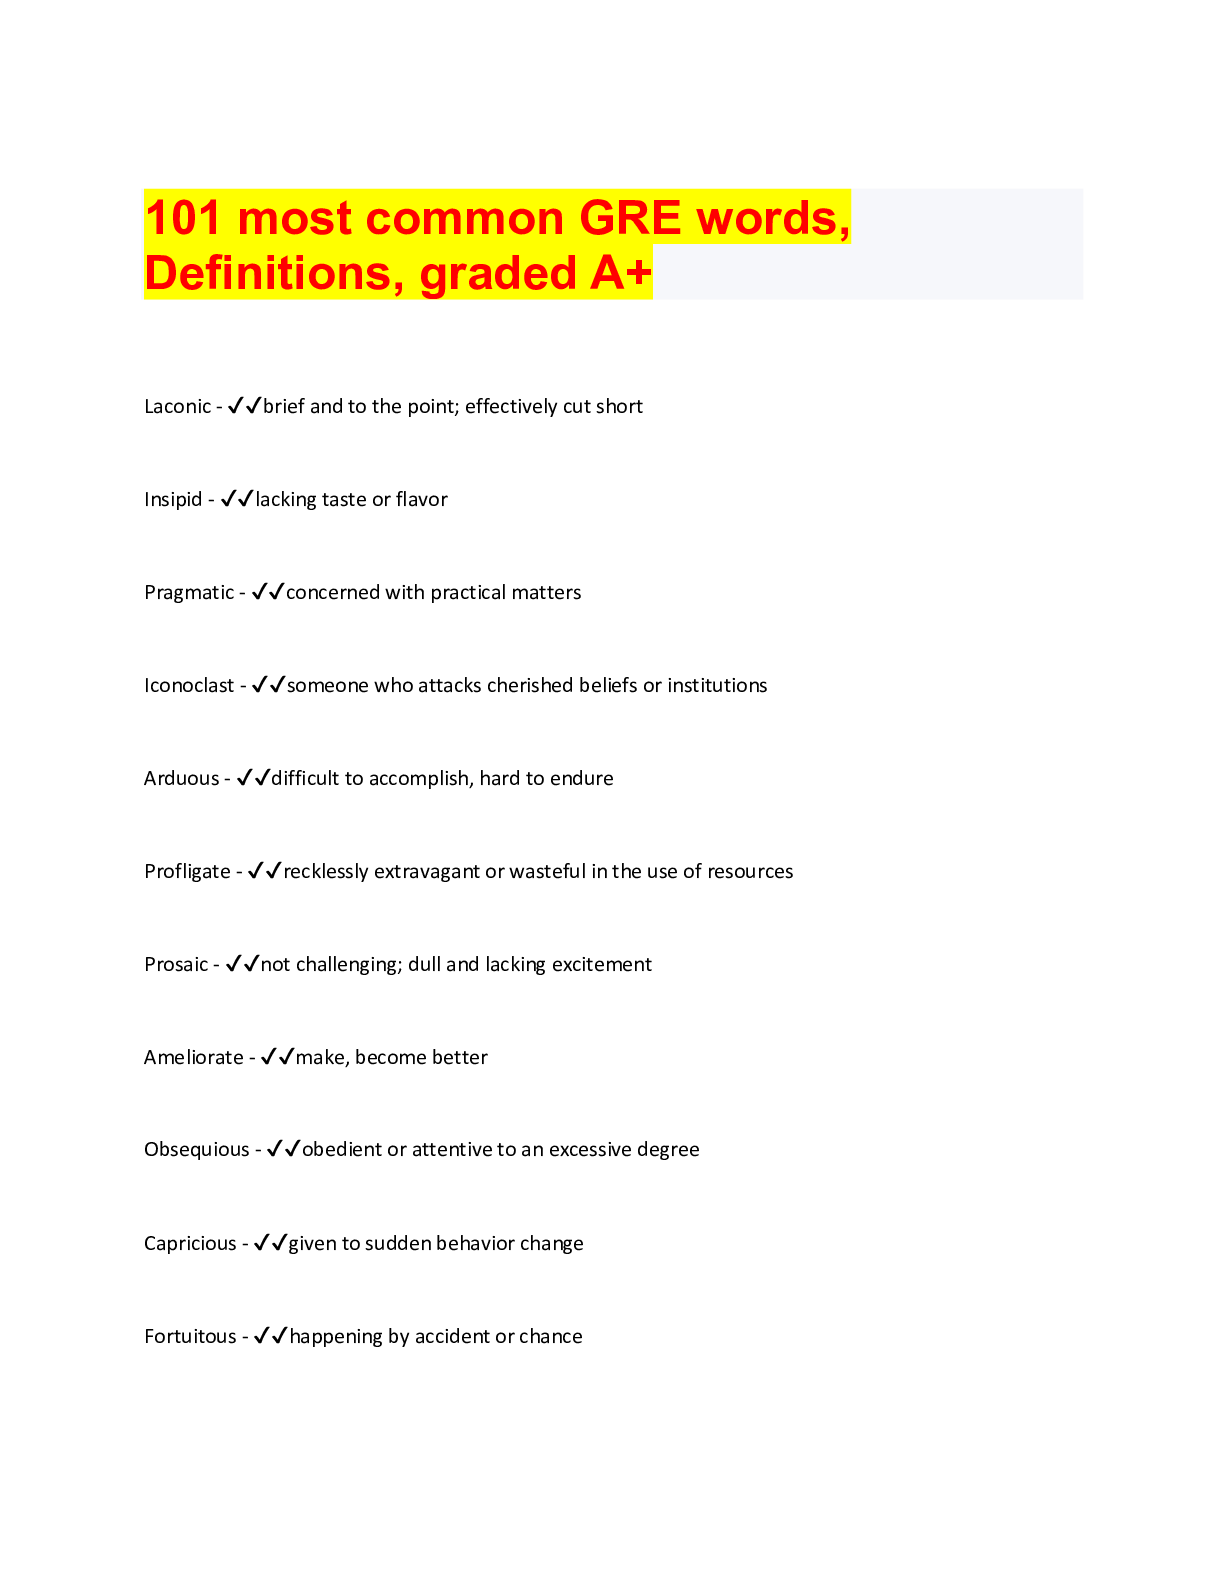 101 most common GRE words, Definitions, graded A+ Browsegrades